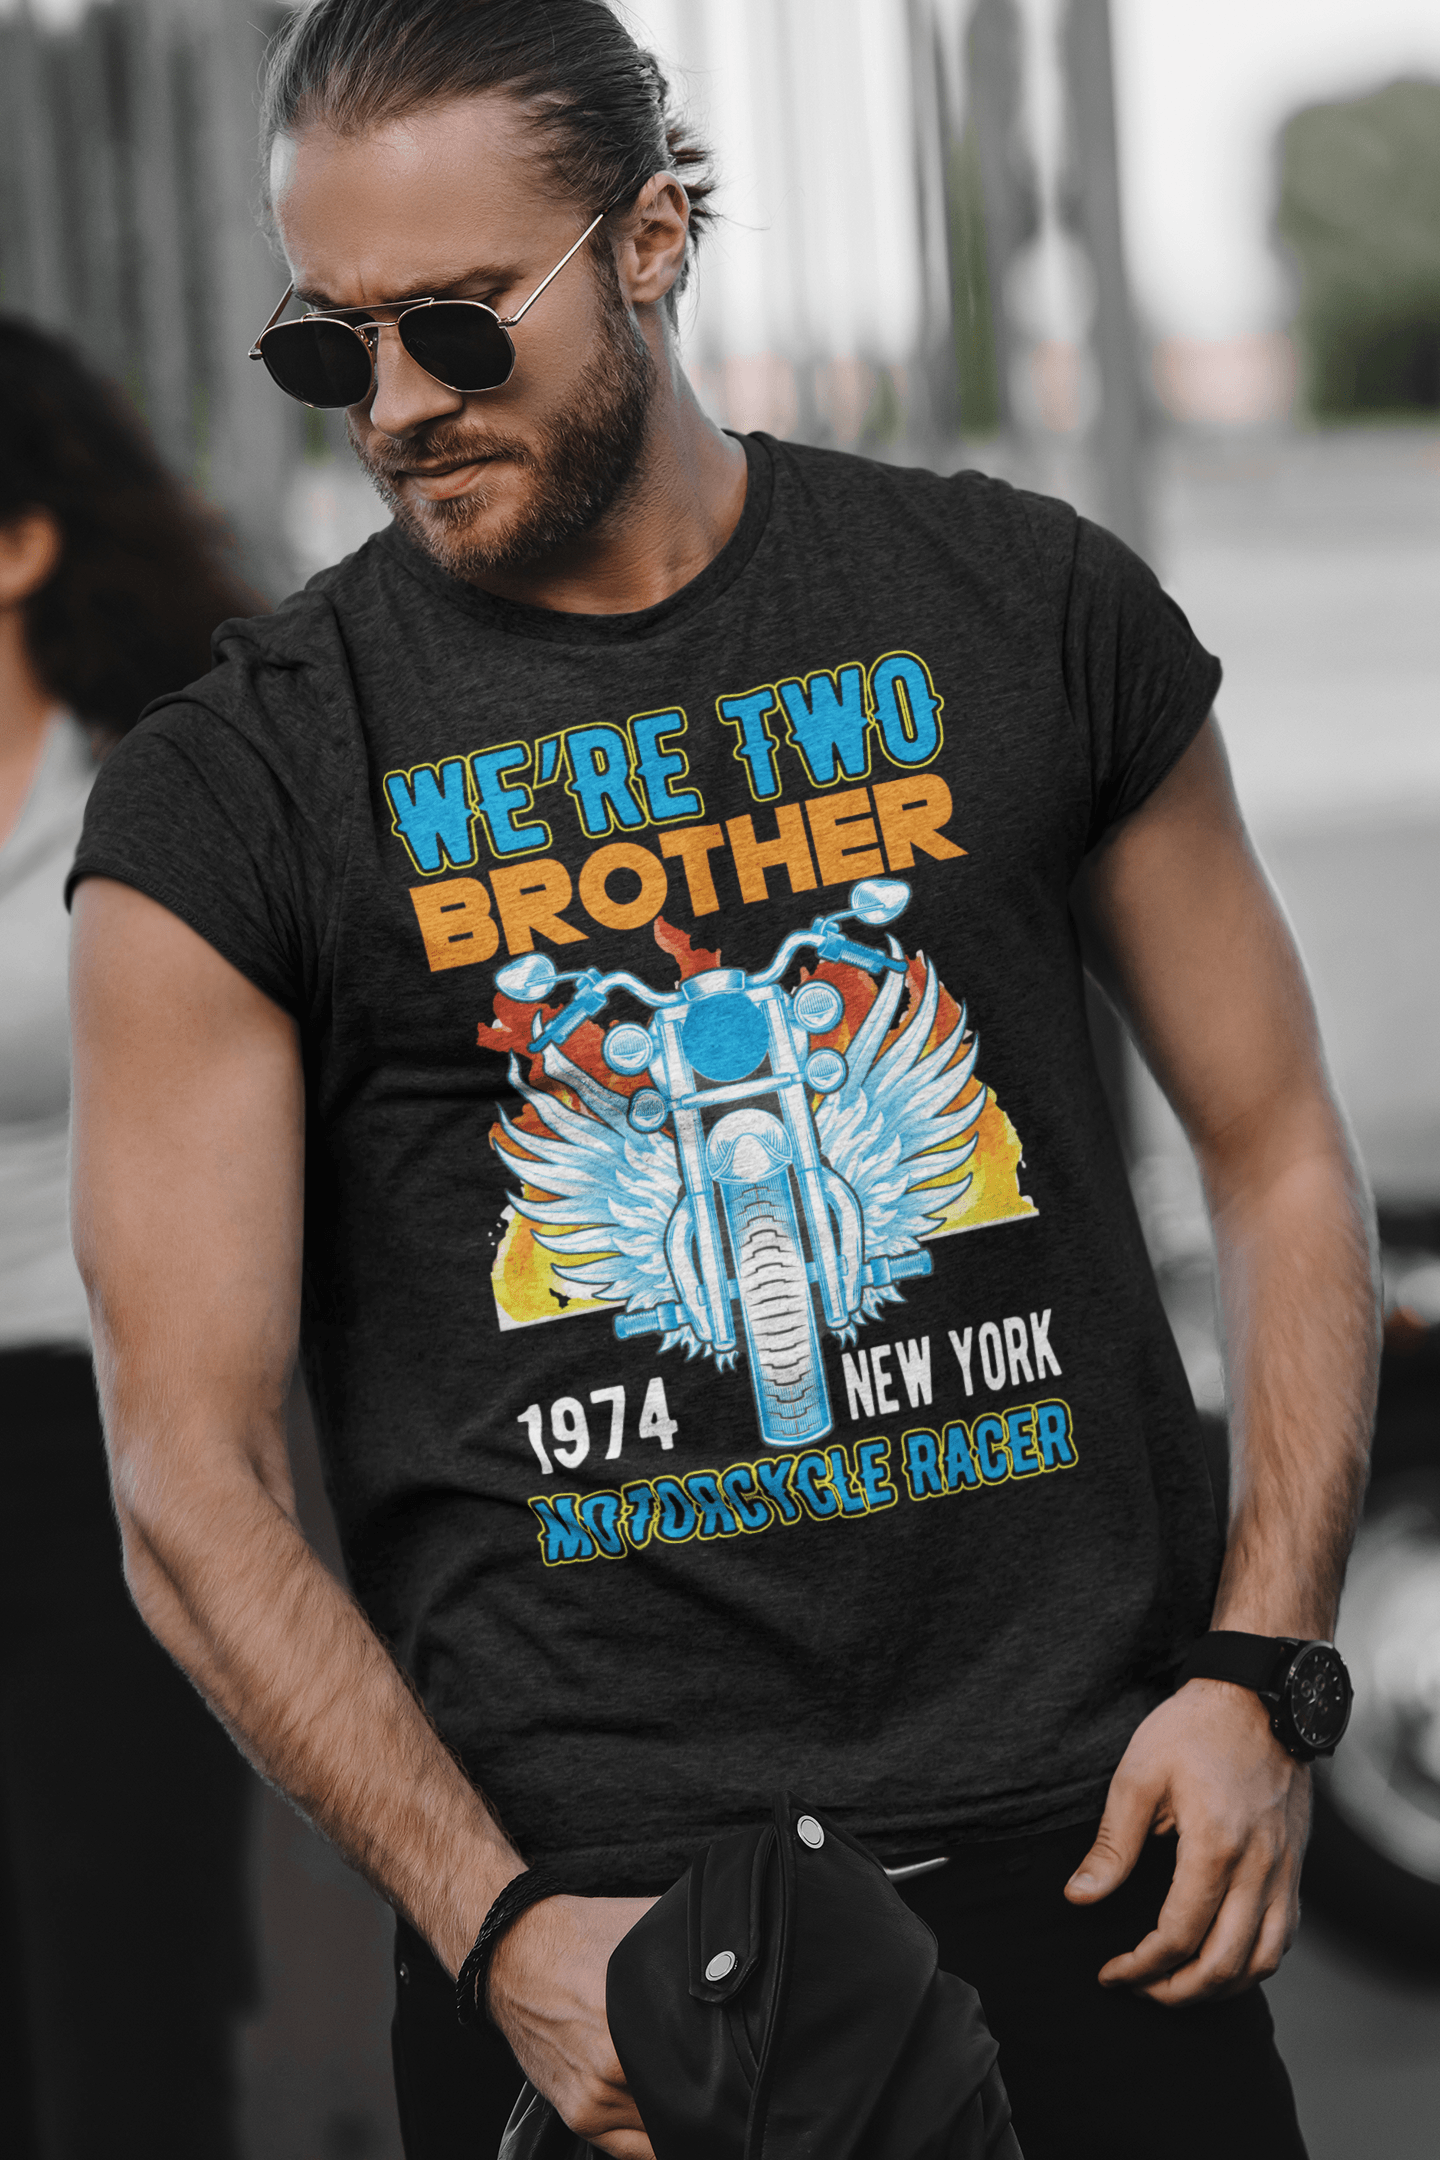 We Are Two Brothers Black T-Shirt For Men - ATOM